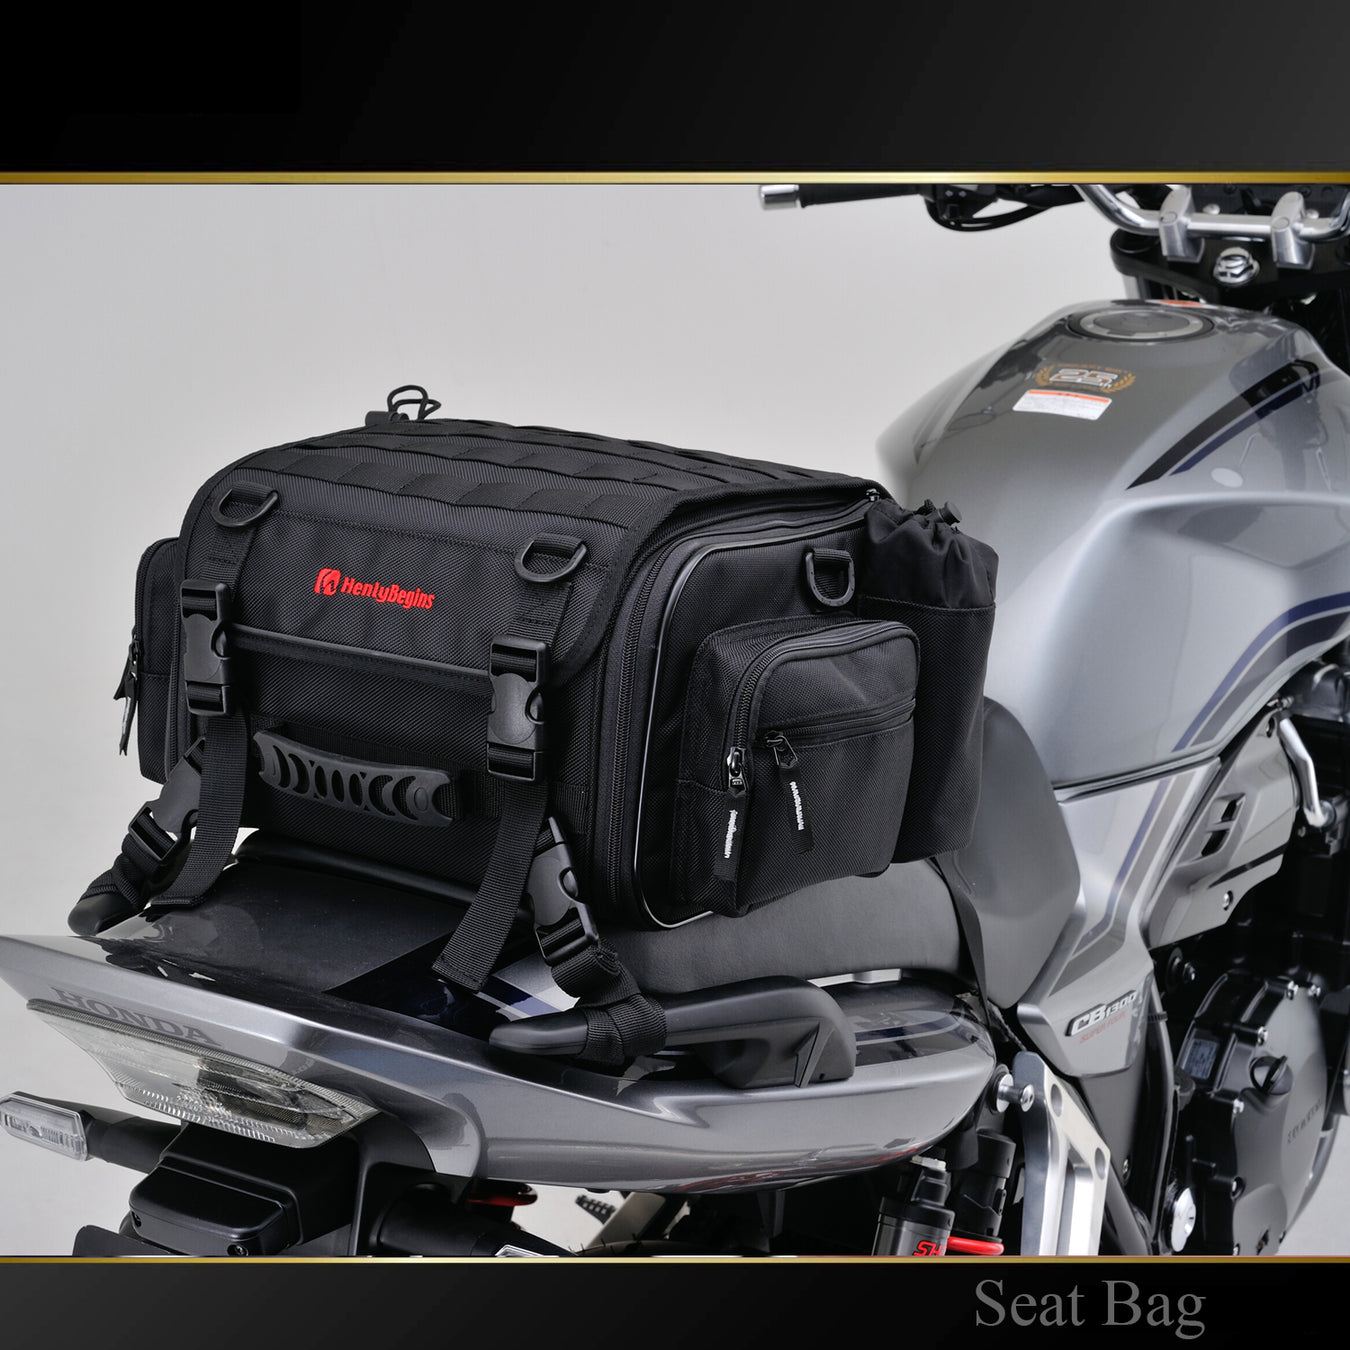 Motorcycle Tail Bag for Touring and Adventure in Small, Medium and Large Sizes